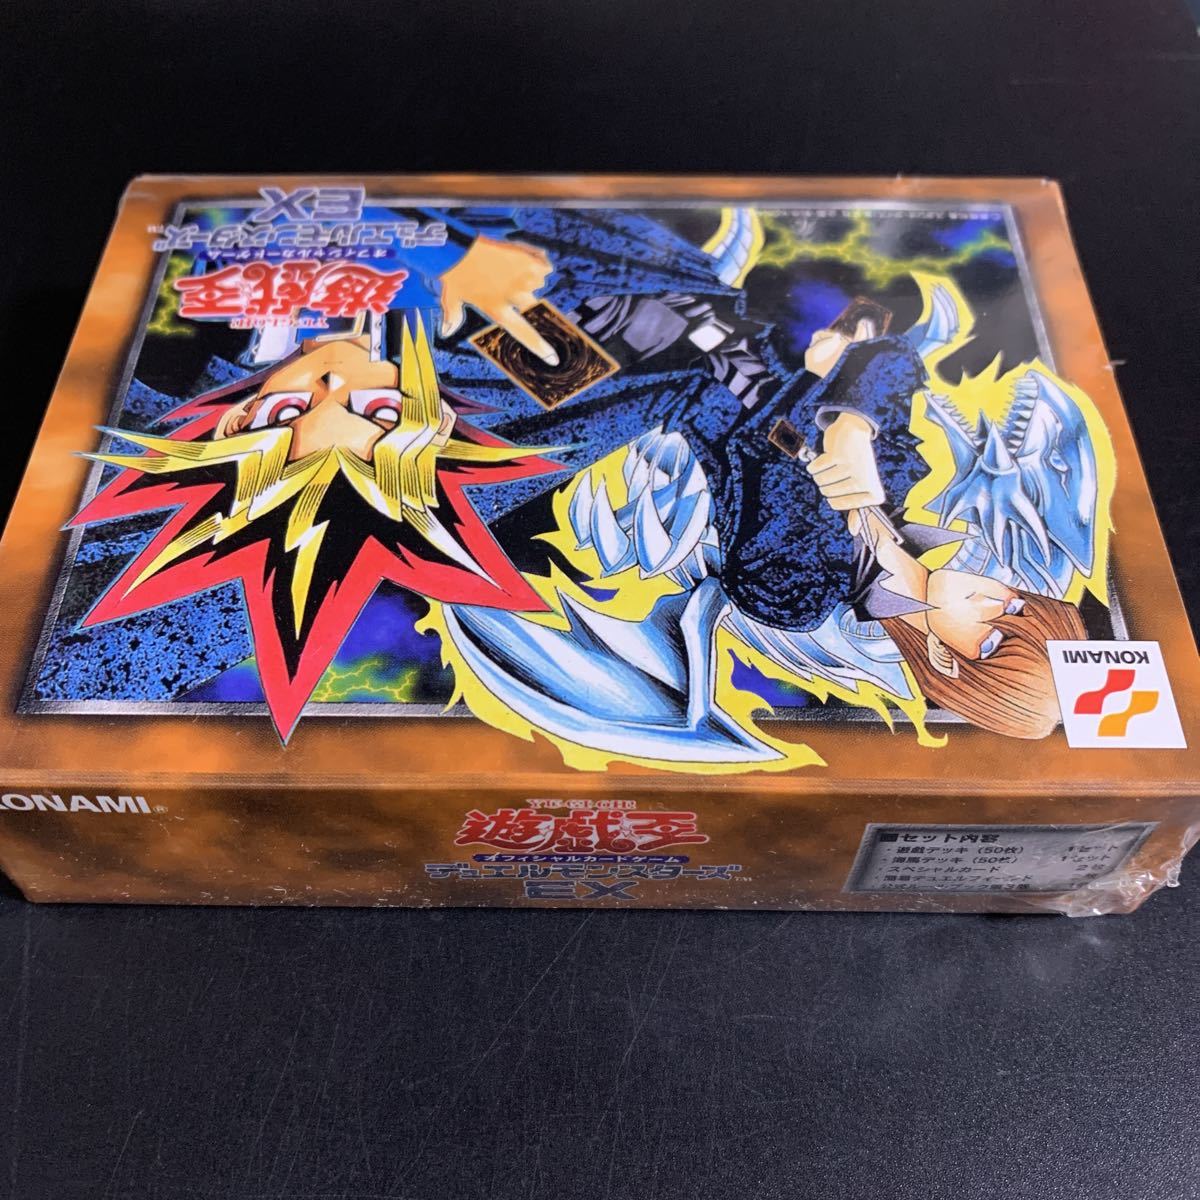 1[ out of print ] Yugioh the first period EX unopened Box shrink attaching!